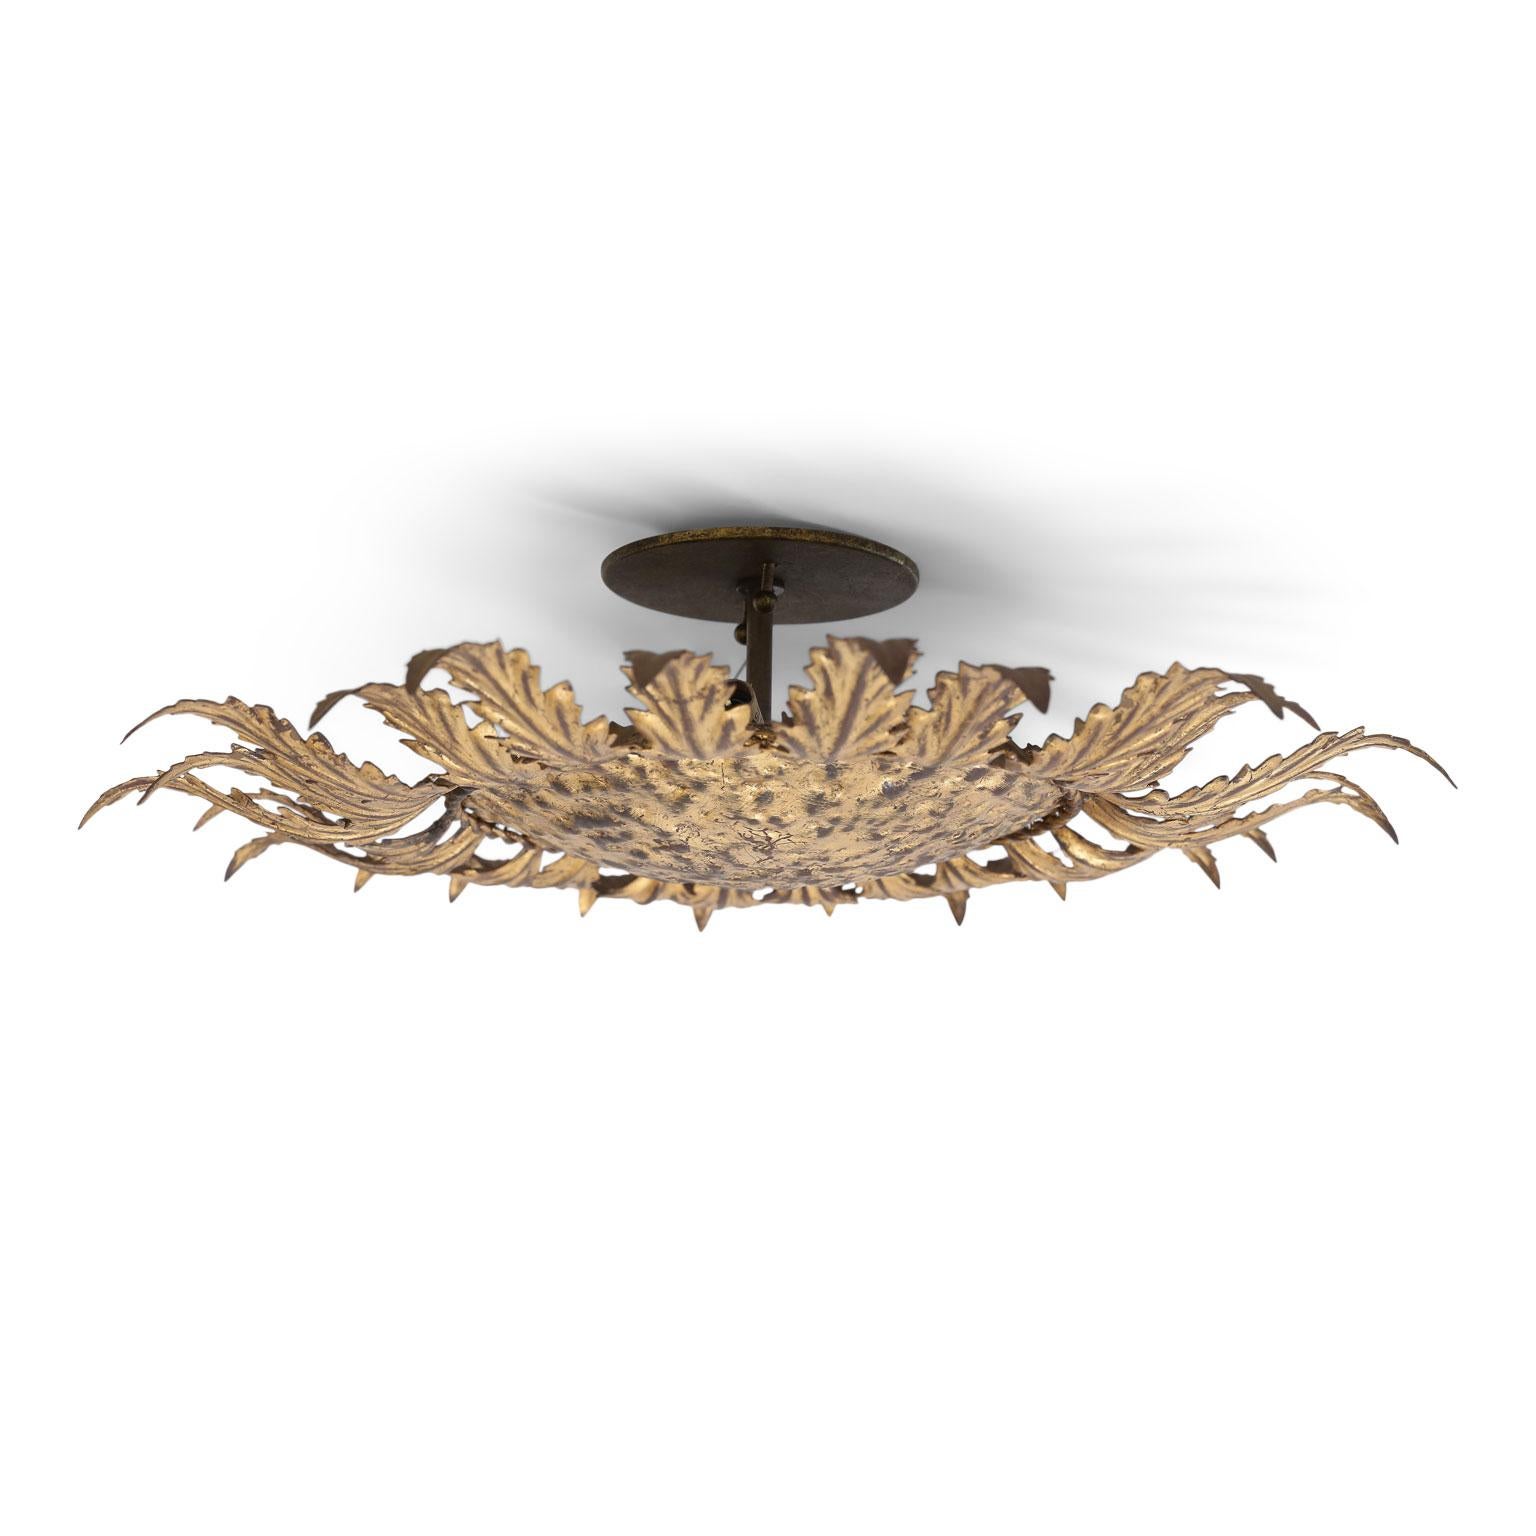 Gilt tole flushmount light for your ceiling or wall. Sunburst design of gilt tole leaves radiating from a gilded hammered tole disc. This vintage Spanish light dates from circa 1950-1970 (Barcelona) and is newly wired for use within the USA.